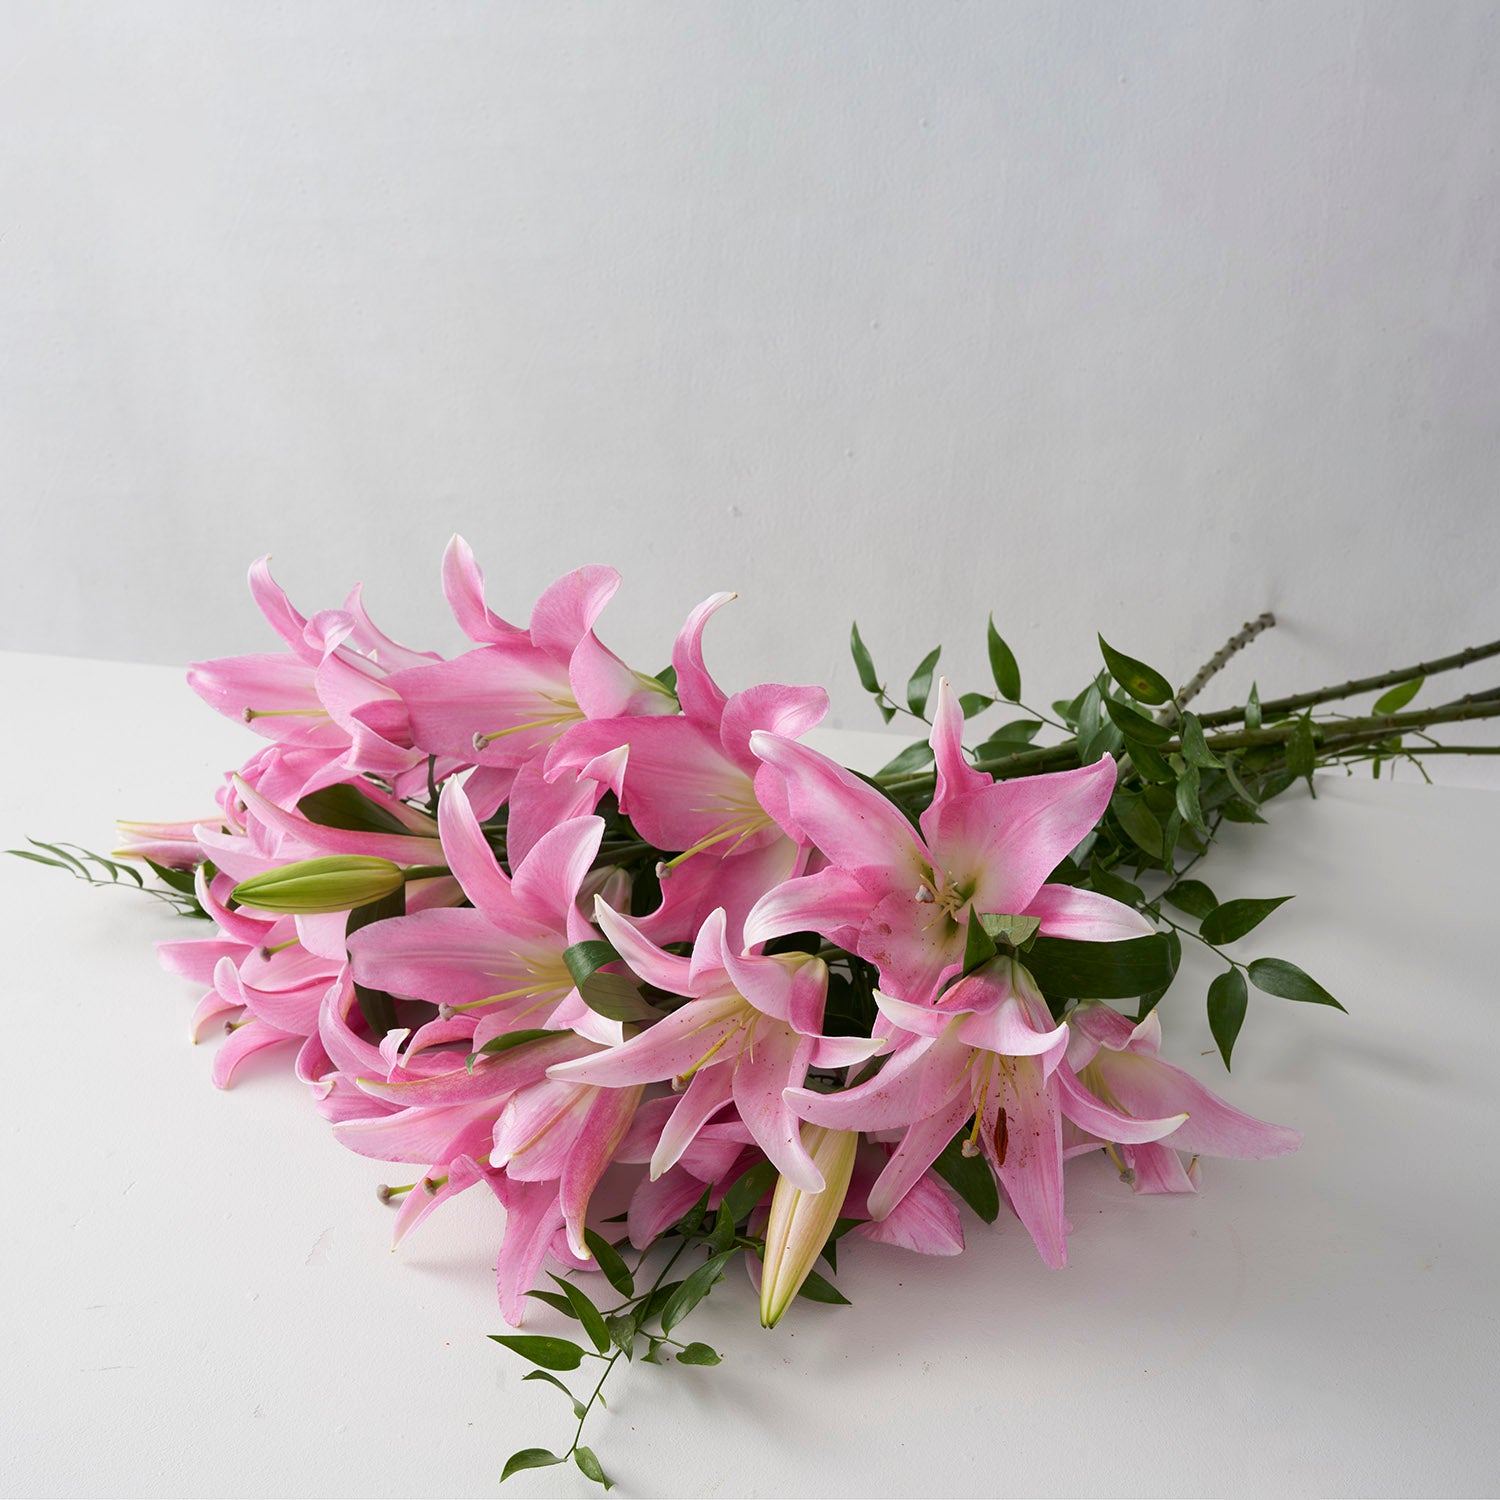 Bouquet of pink lilies on white background.